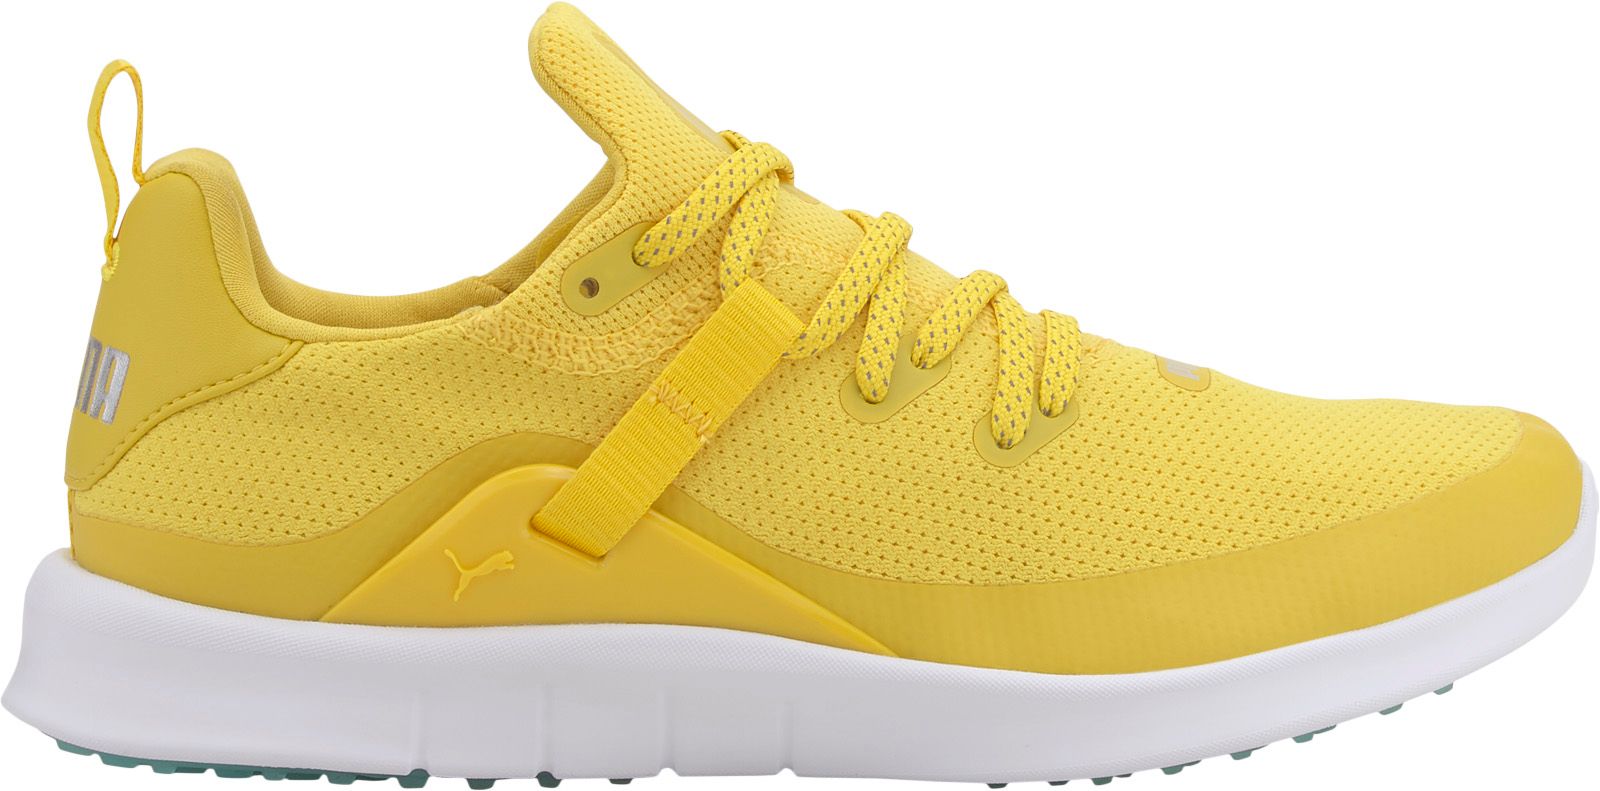 puma golf shoes pink and yellow